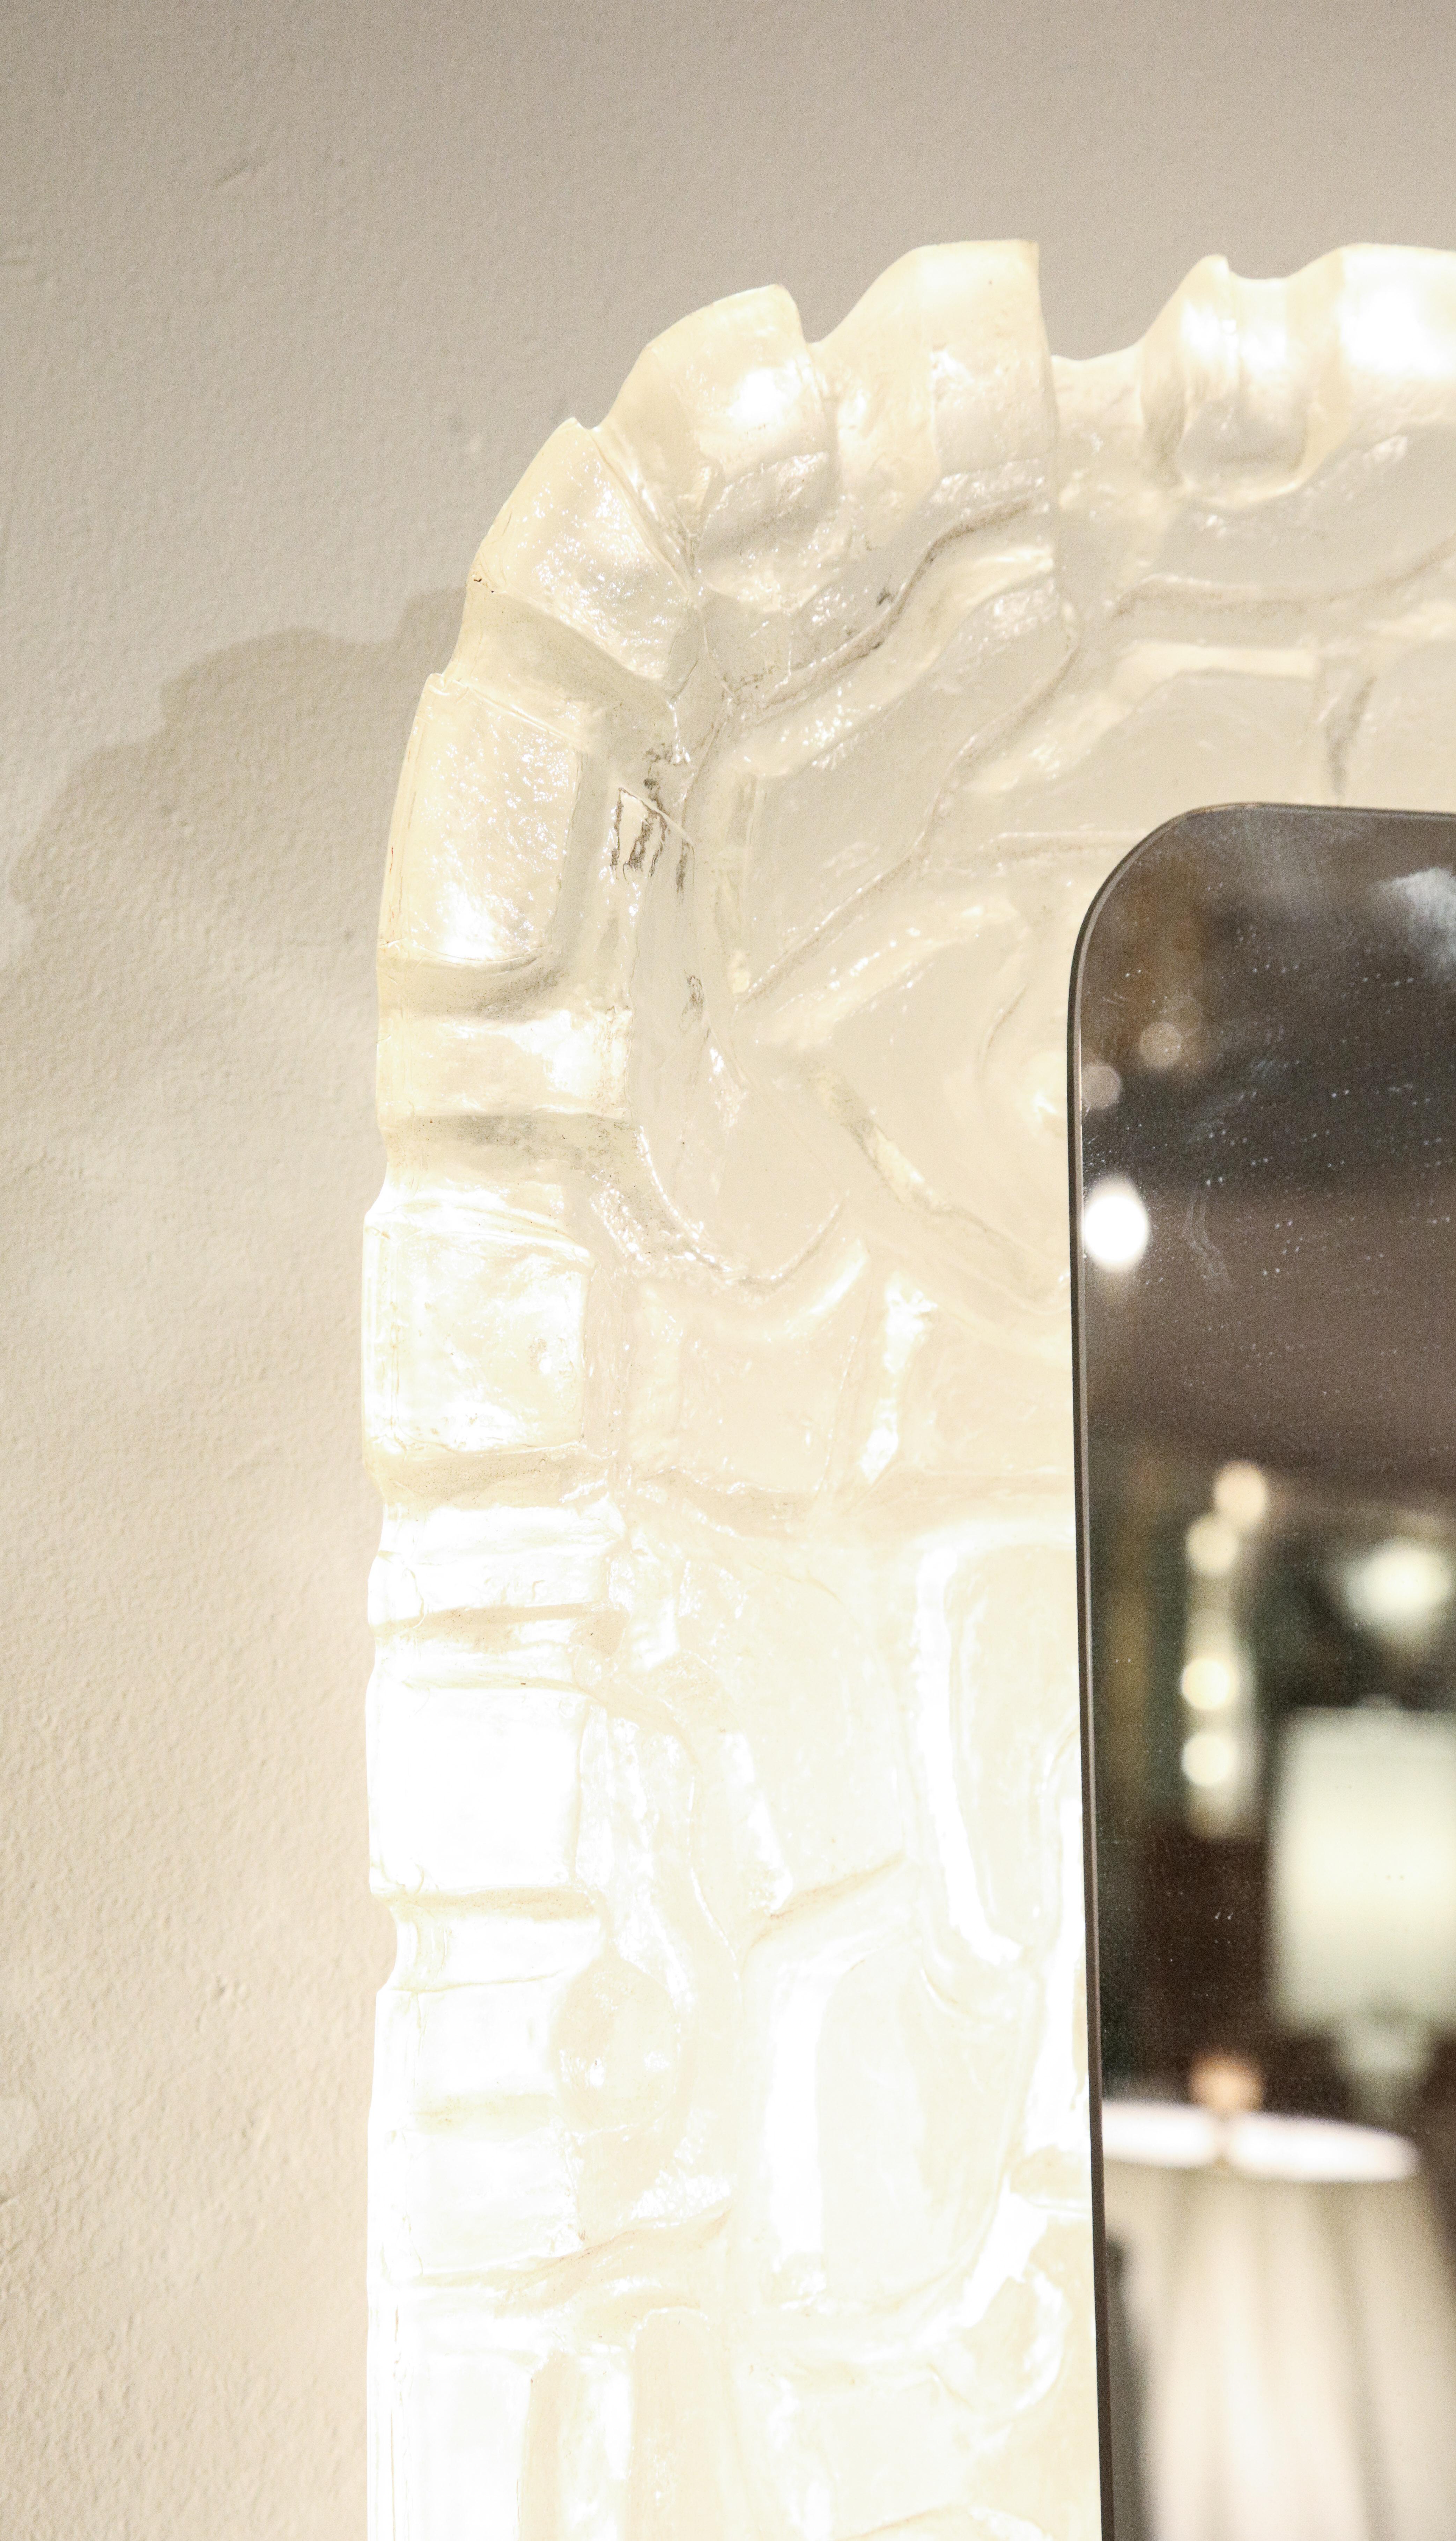 A great illuminated rectangular mirror with molded frame with scalloped edges   resembling frosted glass. The  frame is substantial and deep to hide the bulbs. Looks great both lit and not lit.